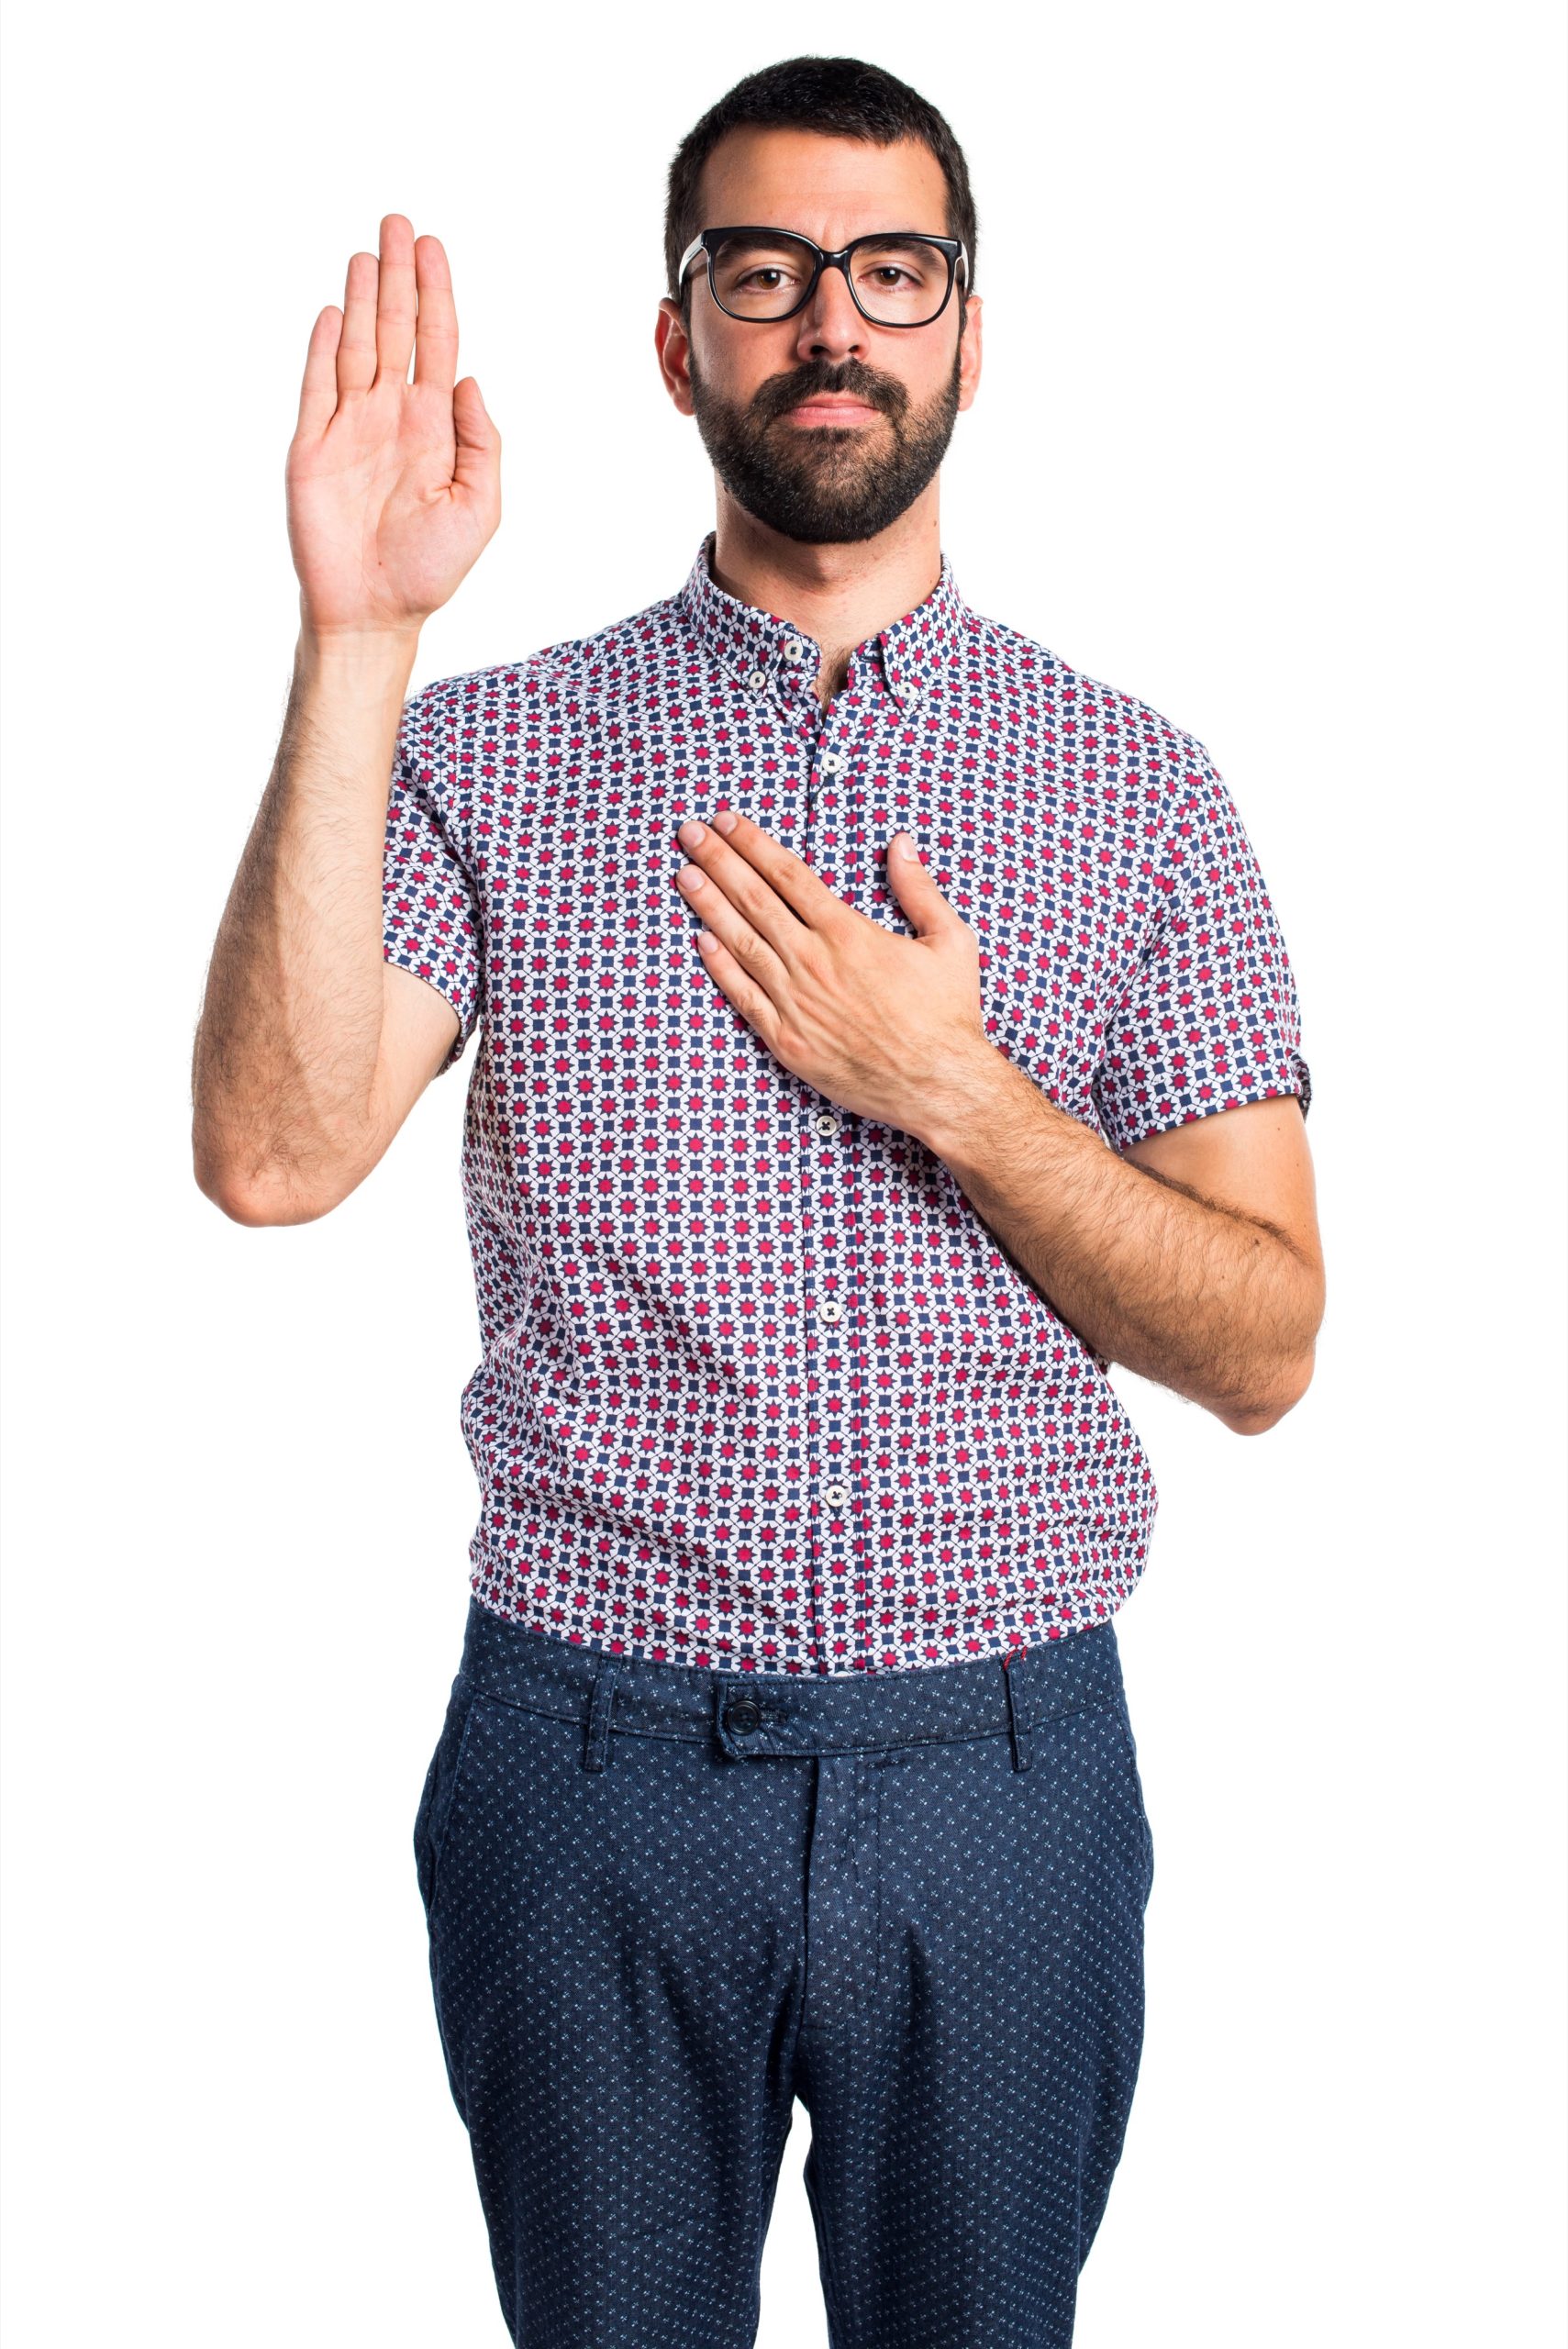 Man with glasses taking an oath